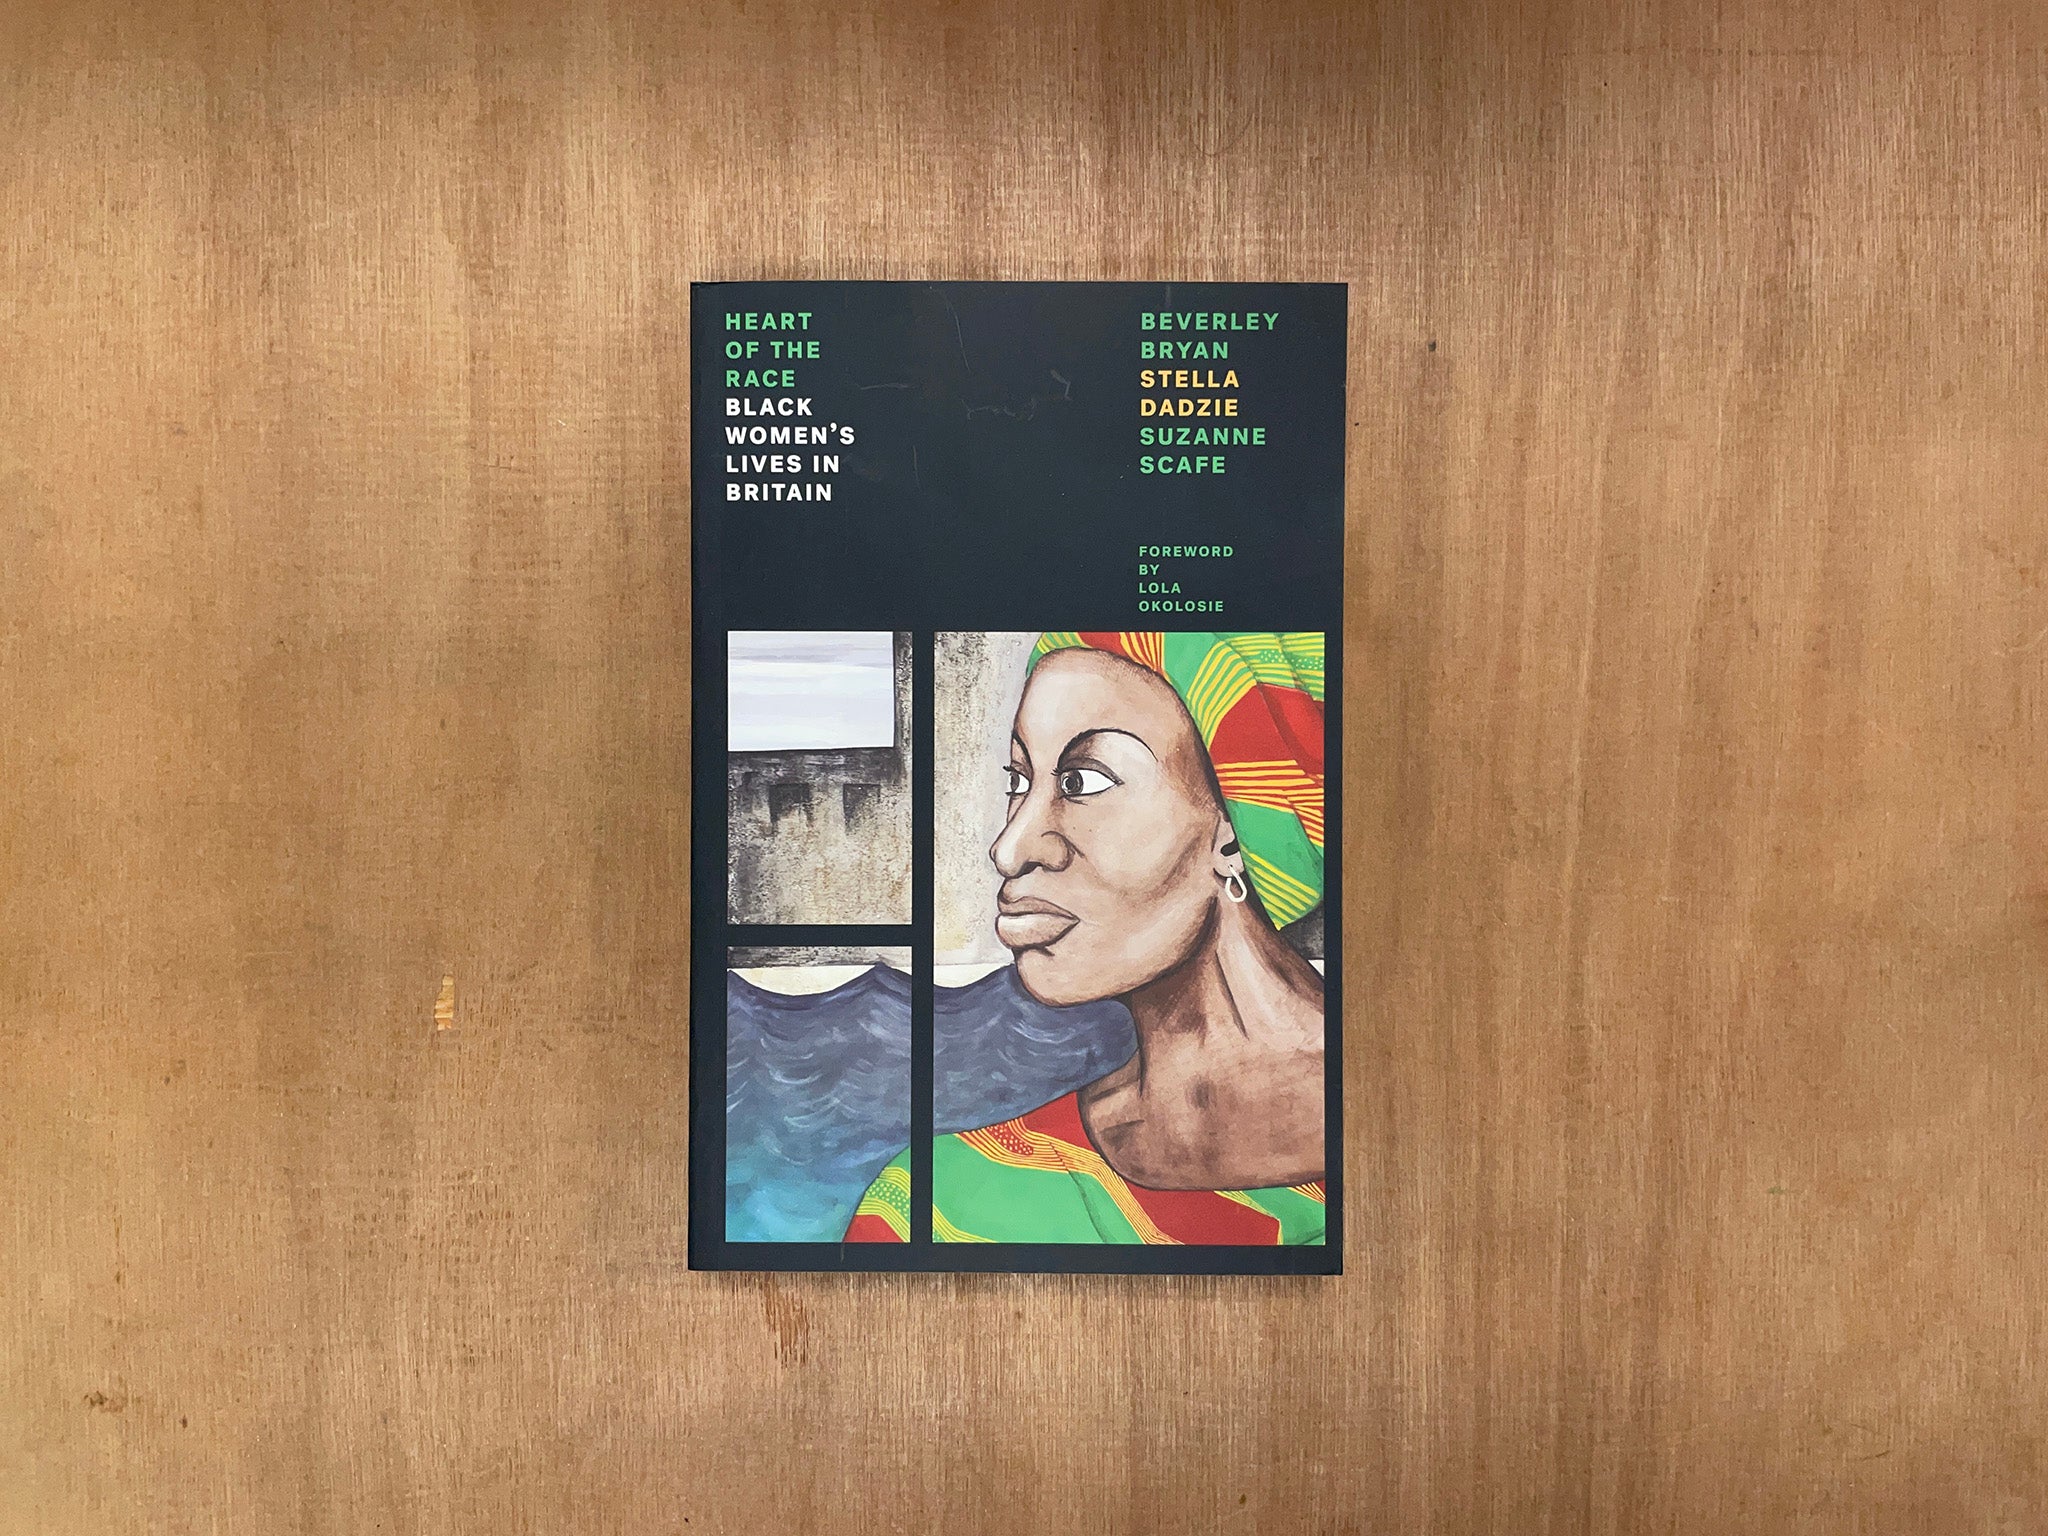 THE HEART OF THE RACE: BLACK WOMEN’S LIVES IN BRITAIN by Beverley Bryan, Stella Dadzie, and Suzanne Scafe